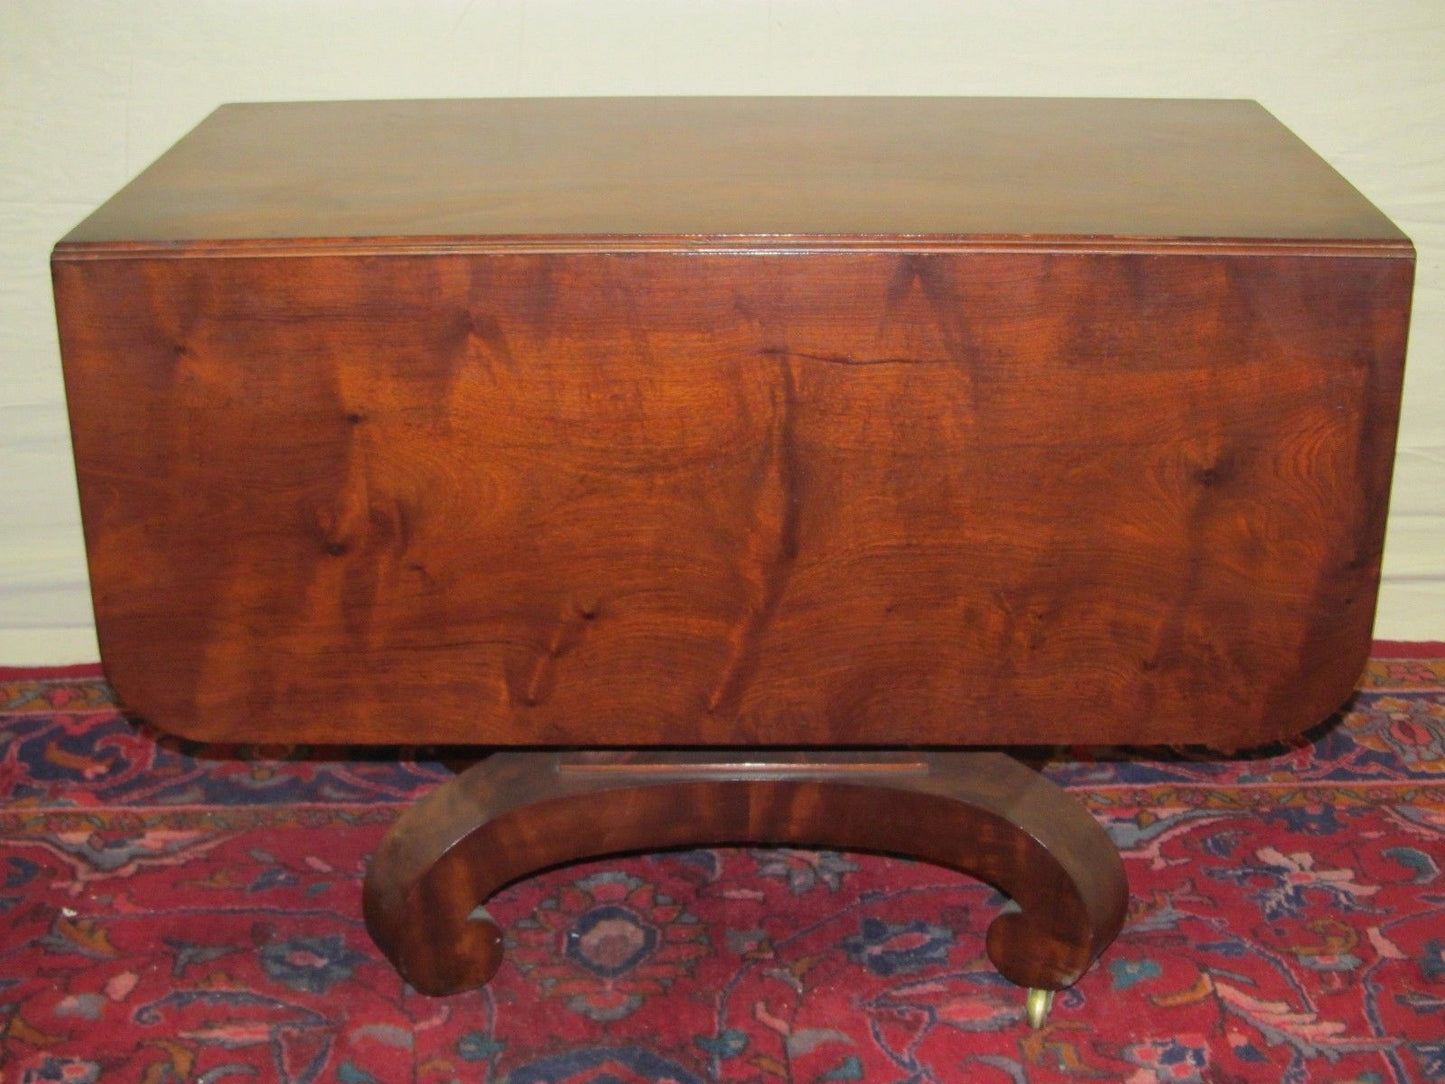 EXCEPTIONAL EMPIRE MAHOGANY BREAKFAST TABLE ON FINELY FORMED OGEE BASE